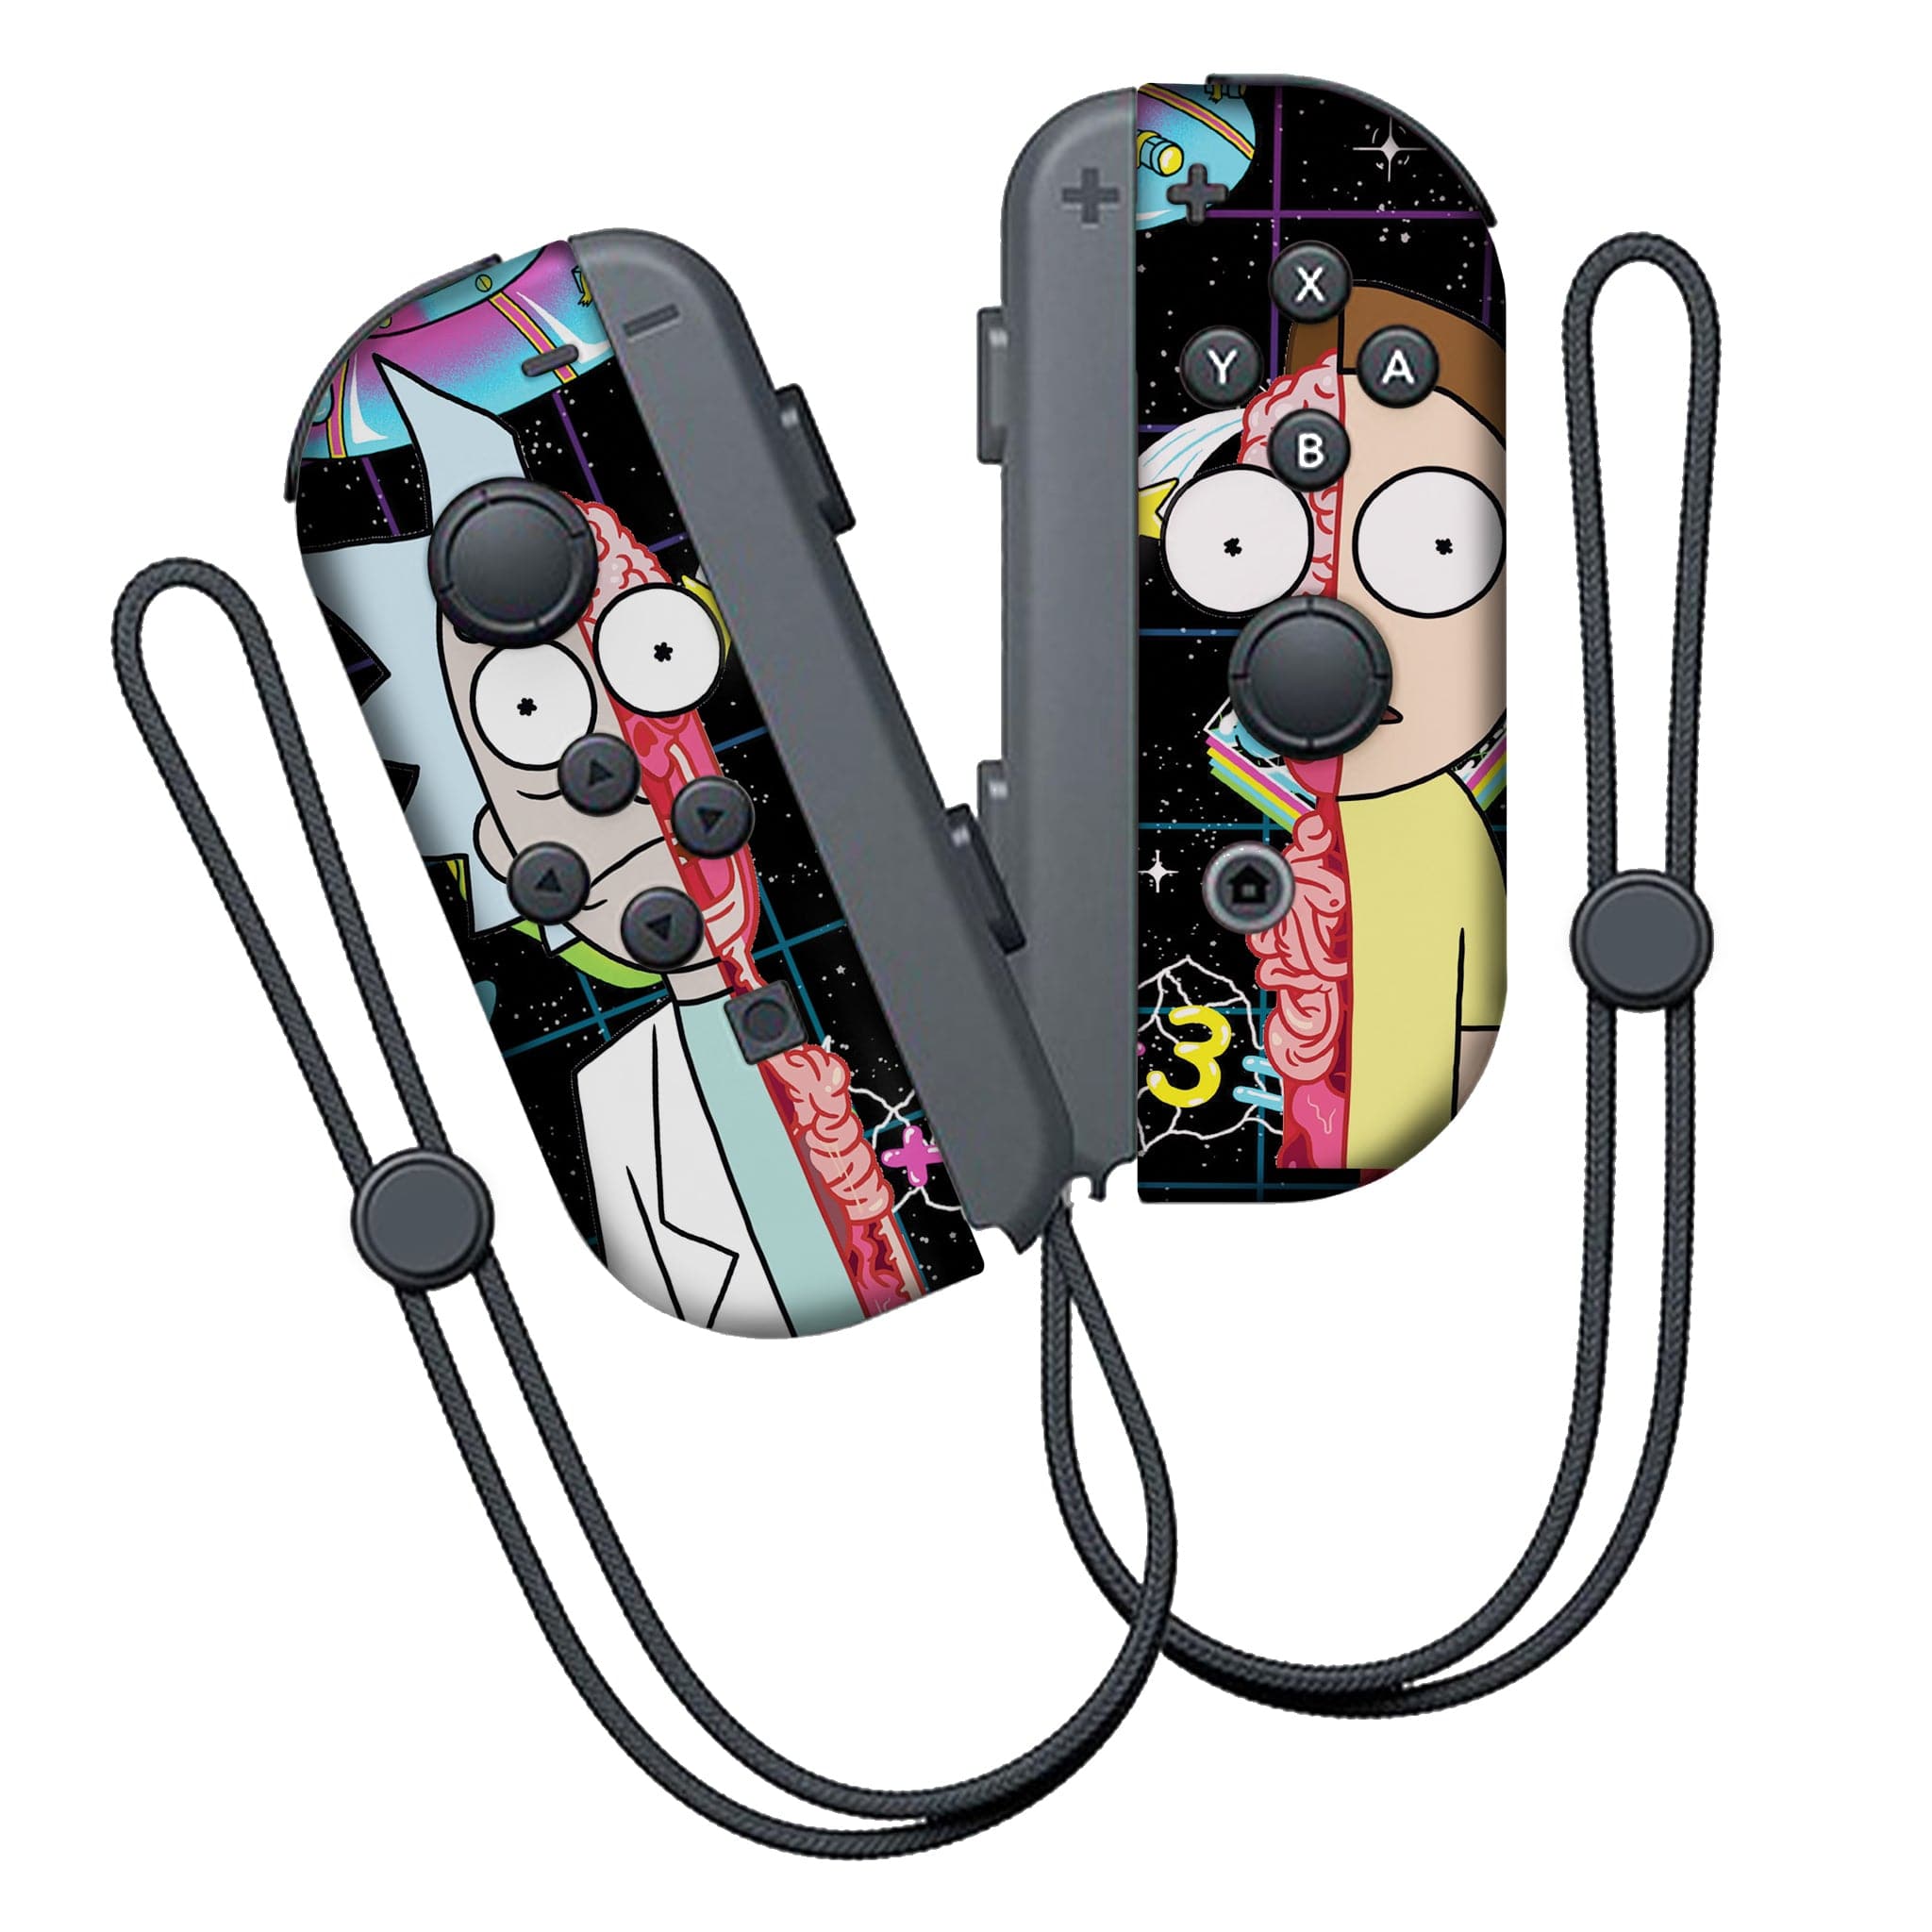 Rick and Morty Halloween edition Inspired Nintendo Switch Joy-Con Left and Right Switch Controllers by Nintendo